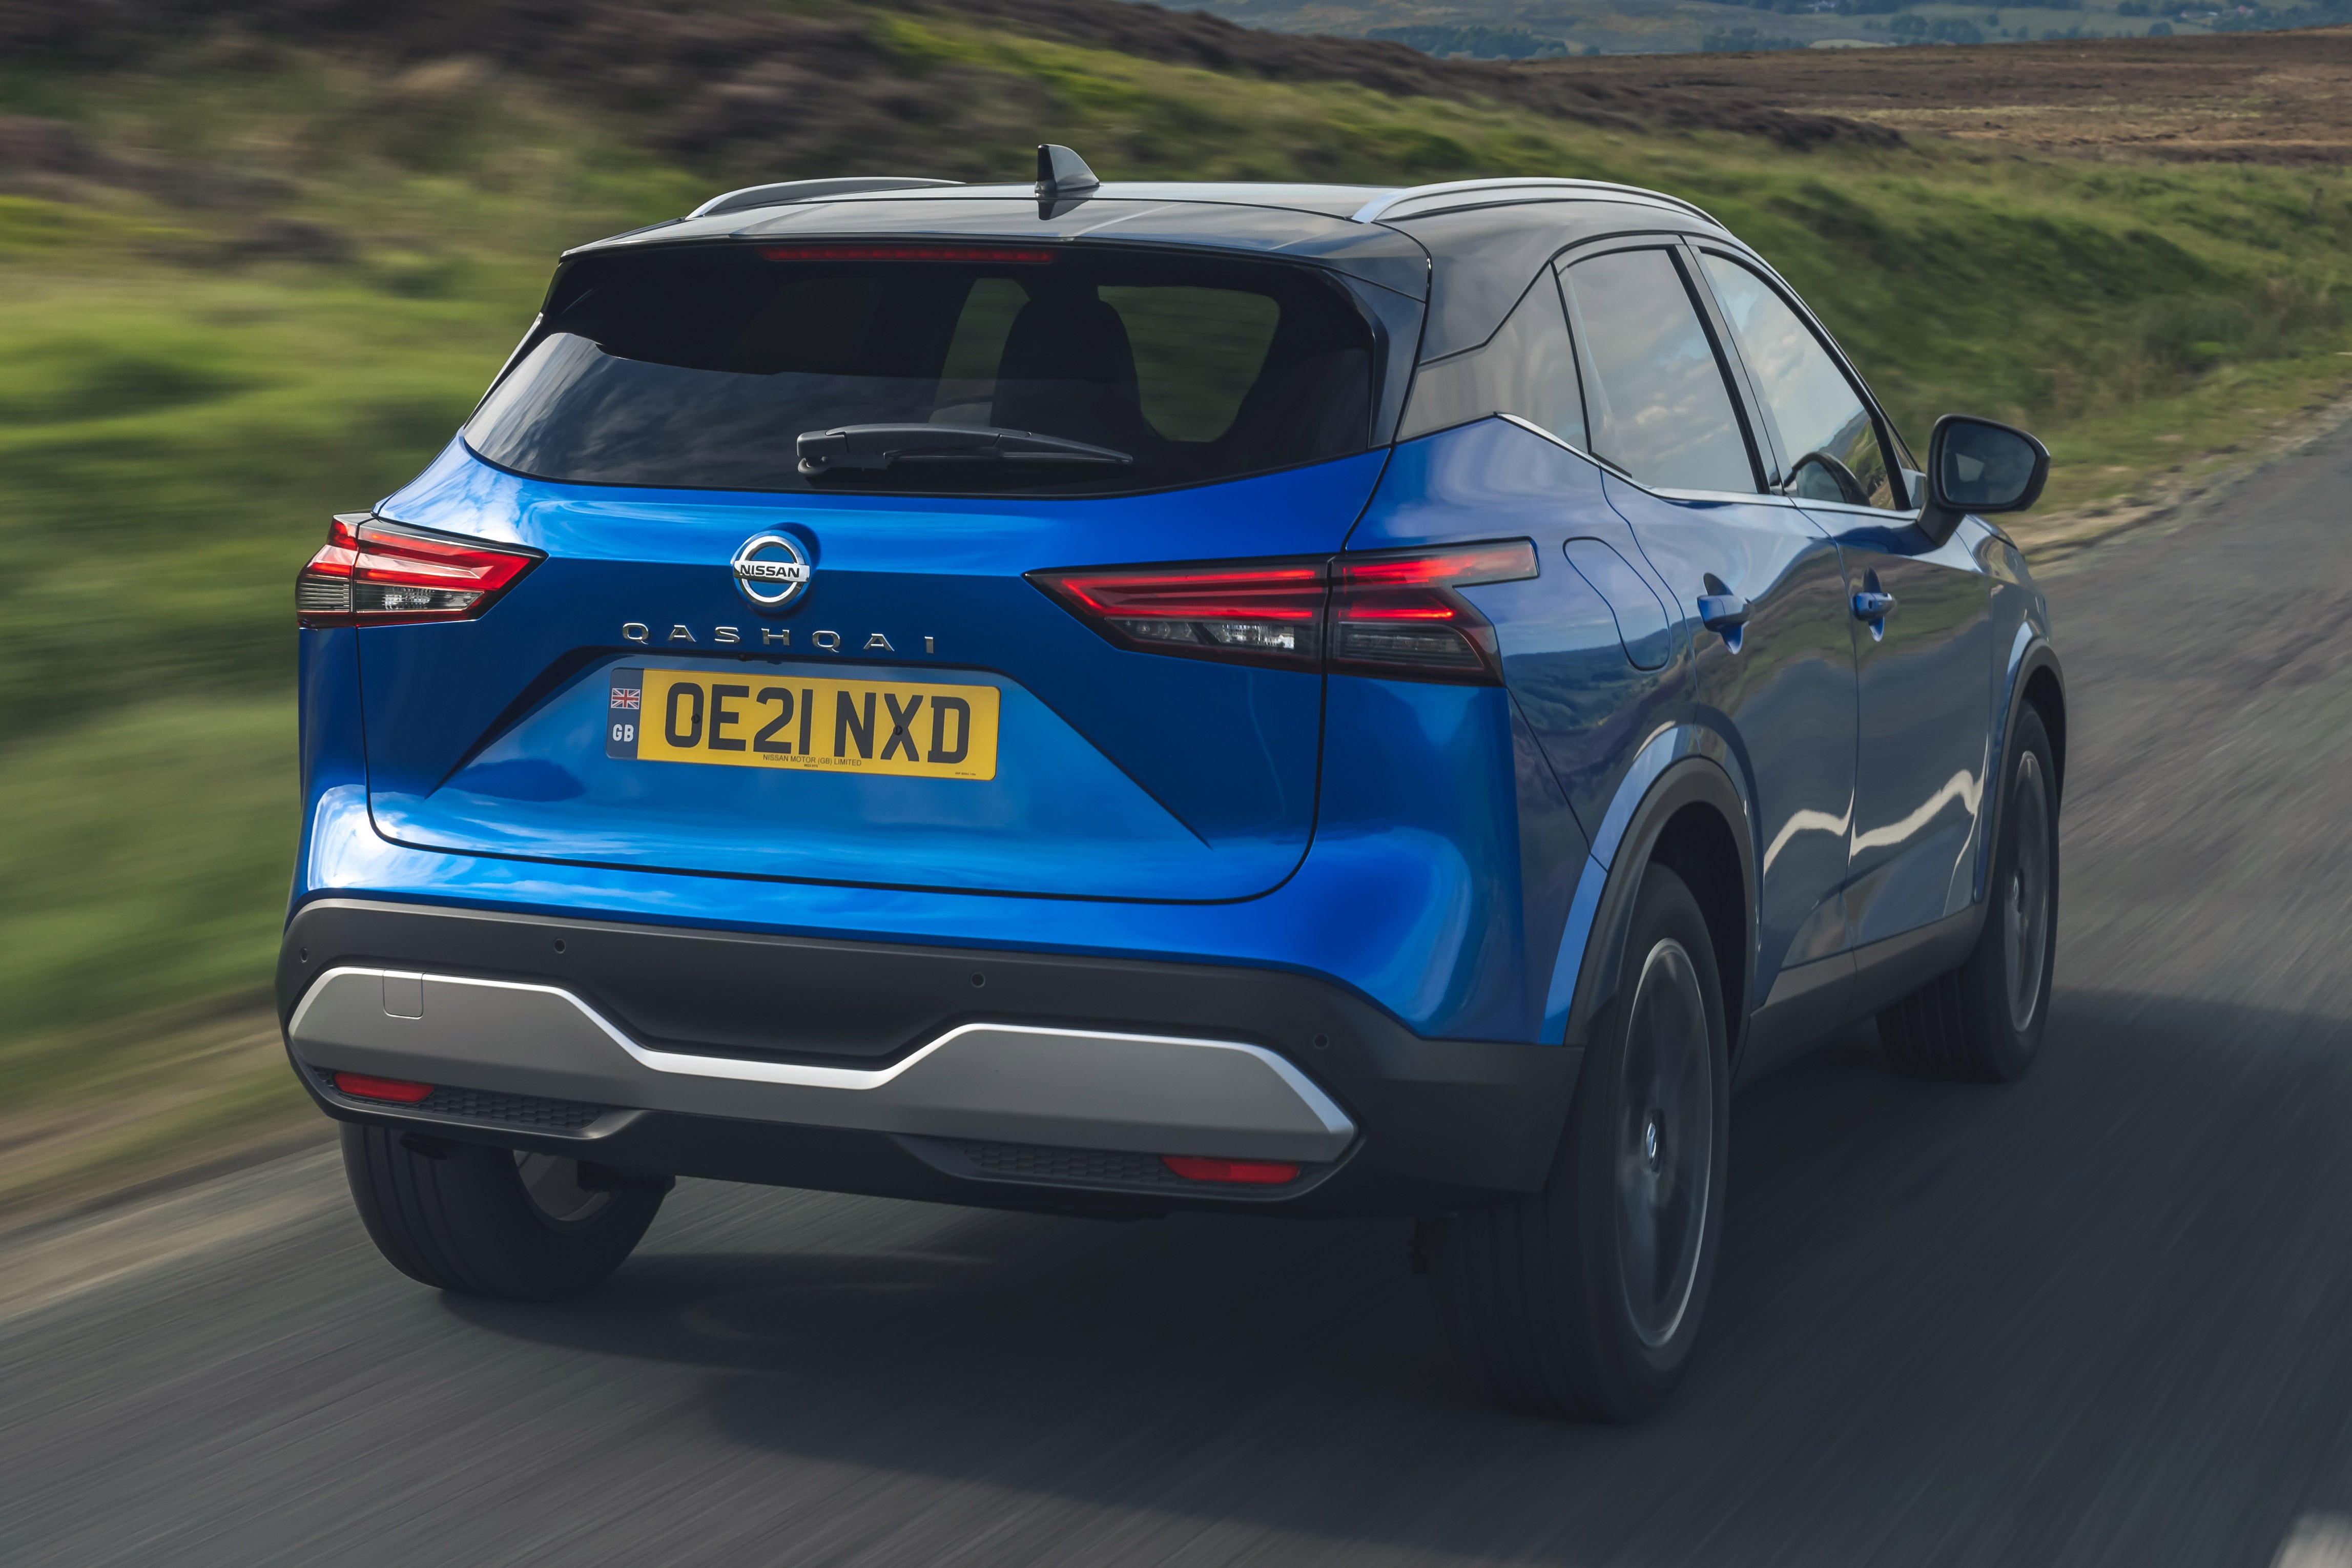 Nissan Qashqai Review 2022: rear exterior photo of the Nissan Qashqai on the road